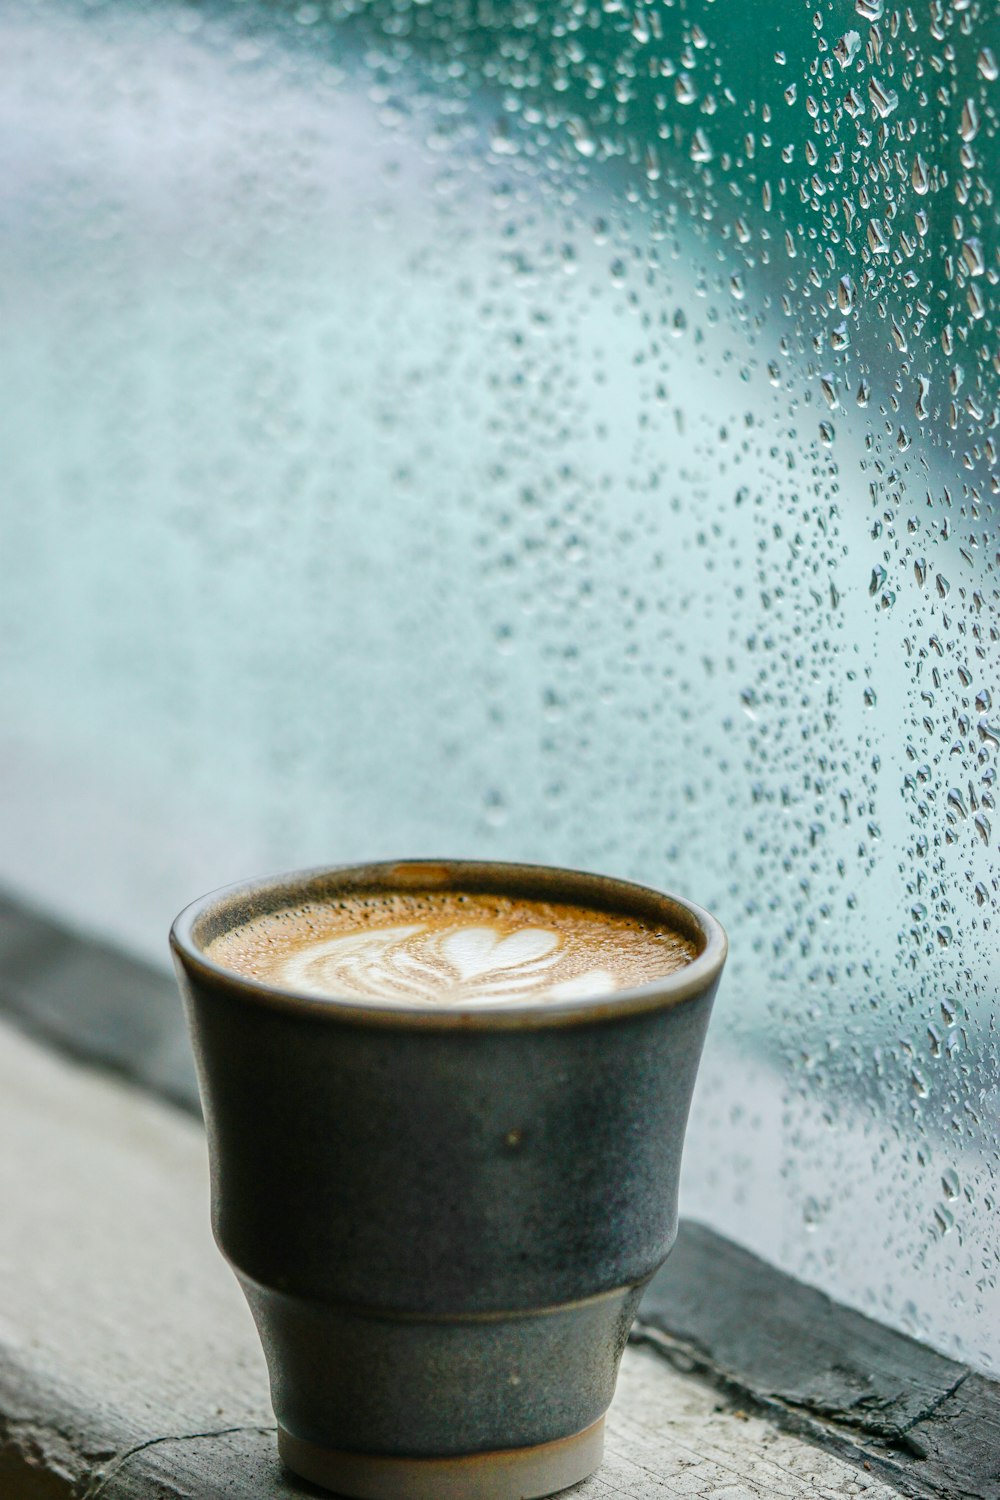 Best Coffee Rain Pictures Hd Download Free Images On Unsplash